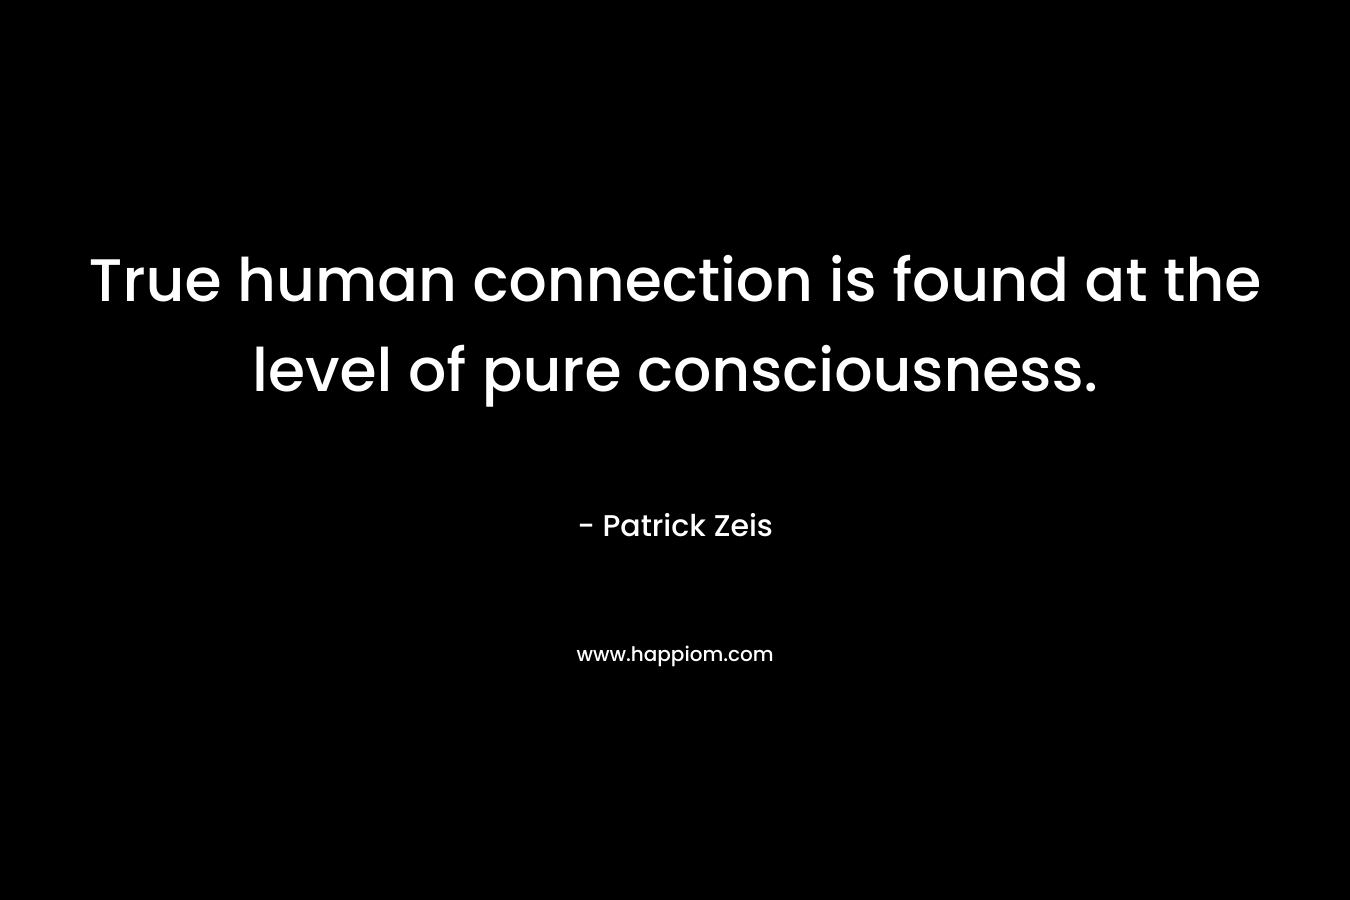 True human connection is found at the level of pure consciousness.